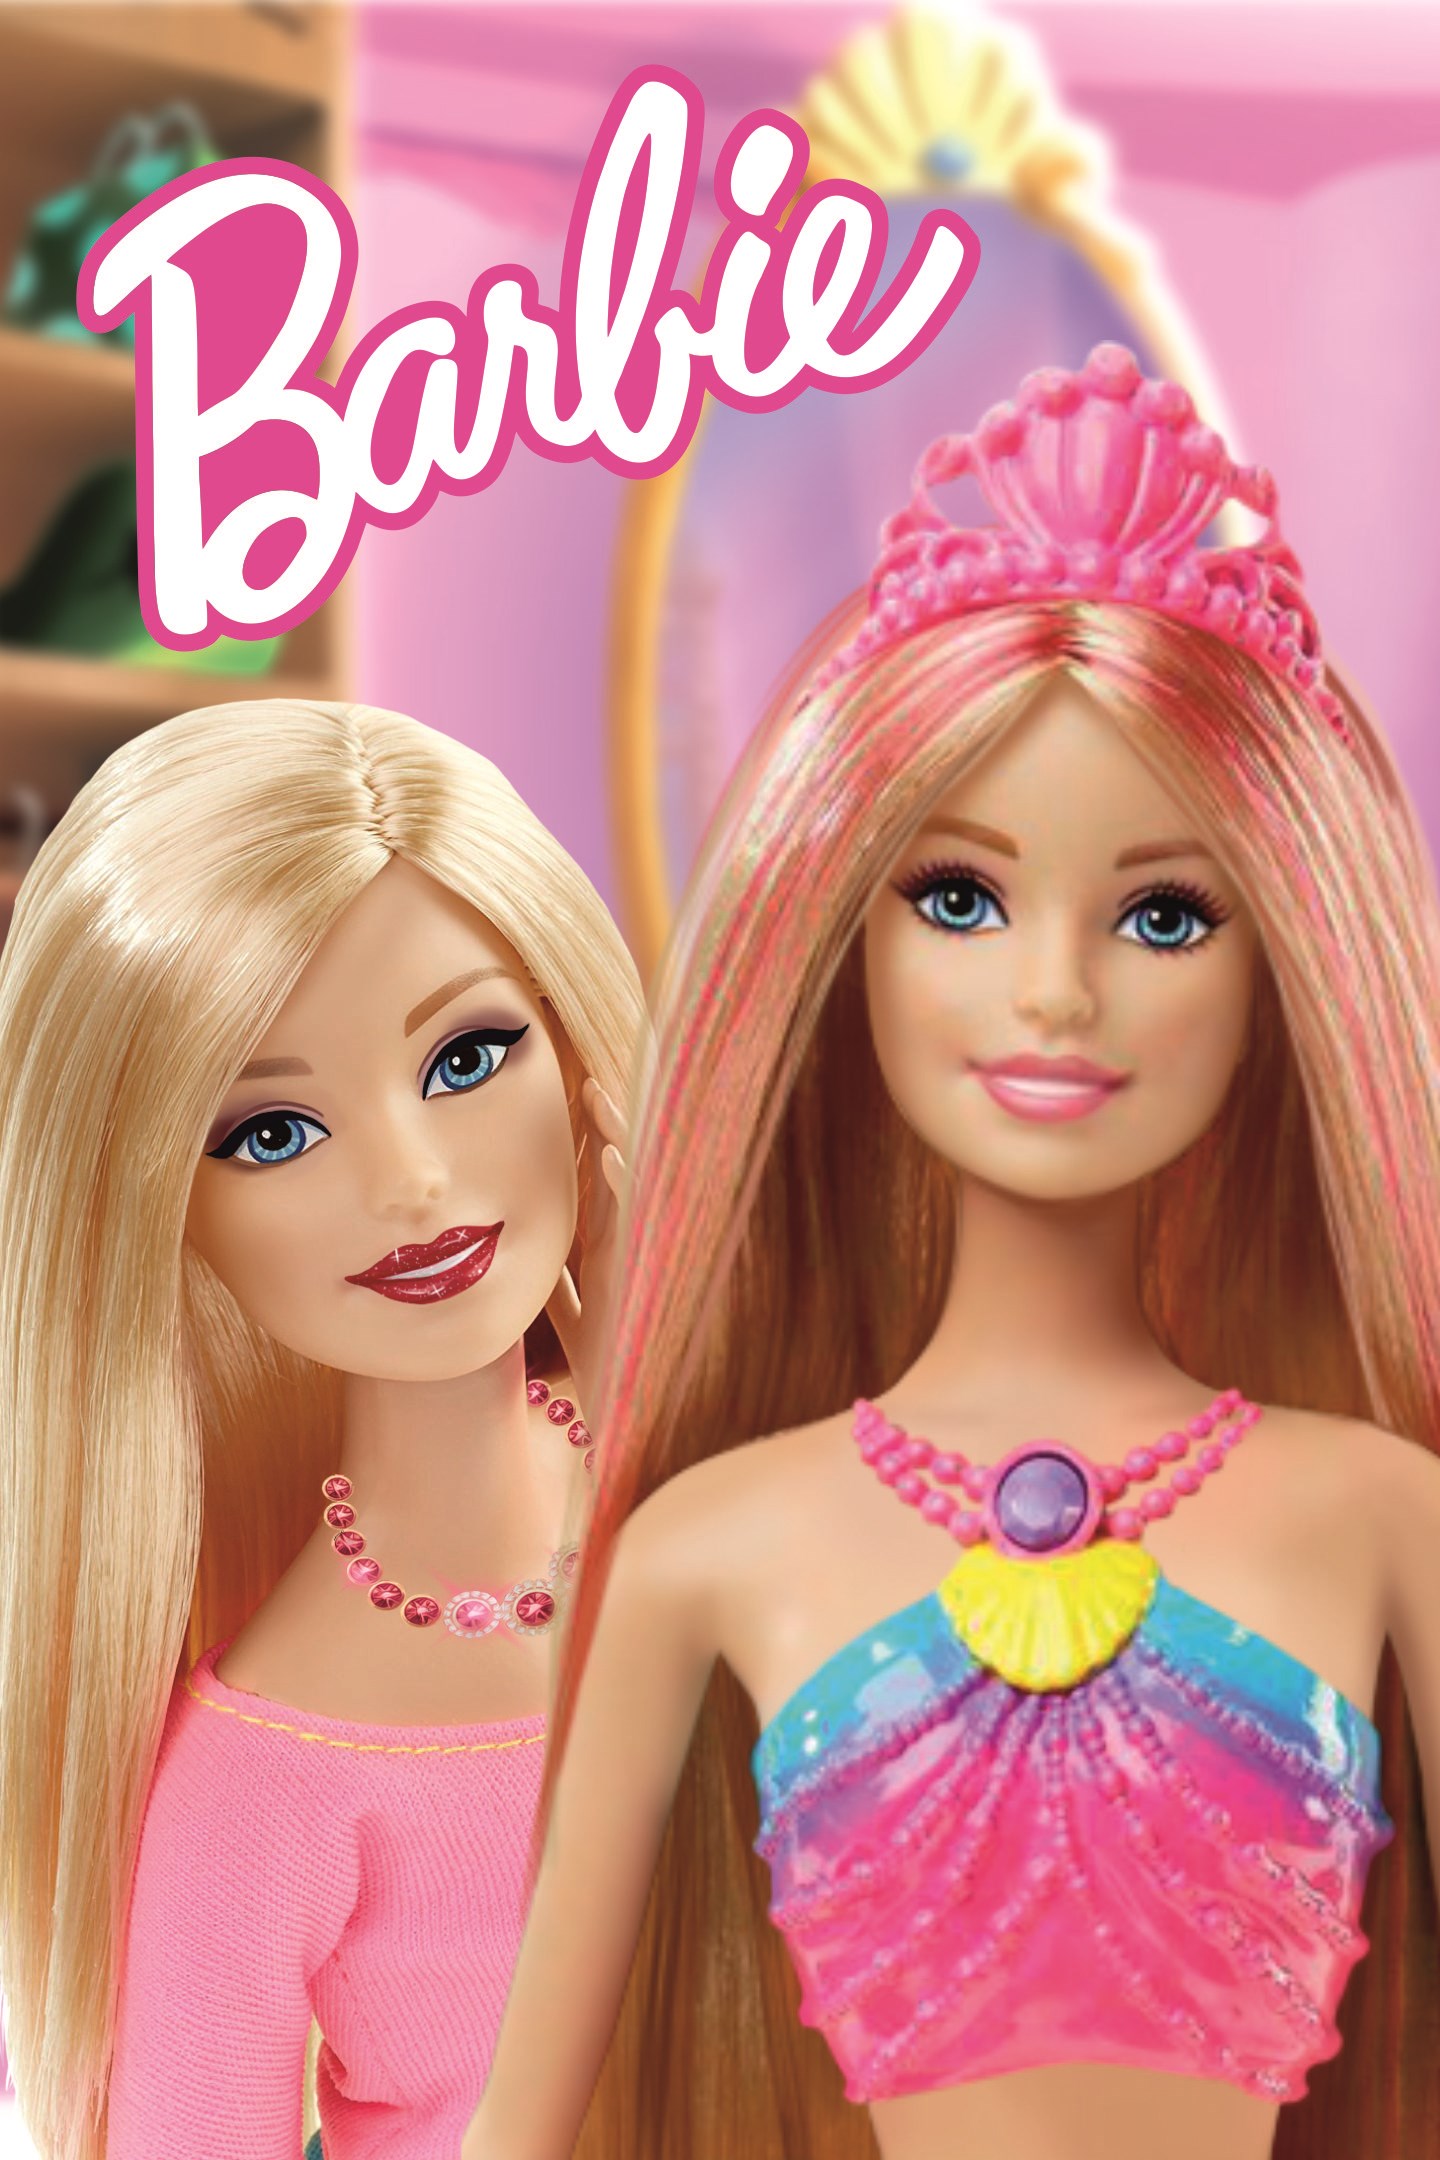 barbie play store